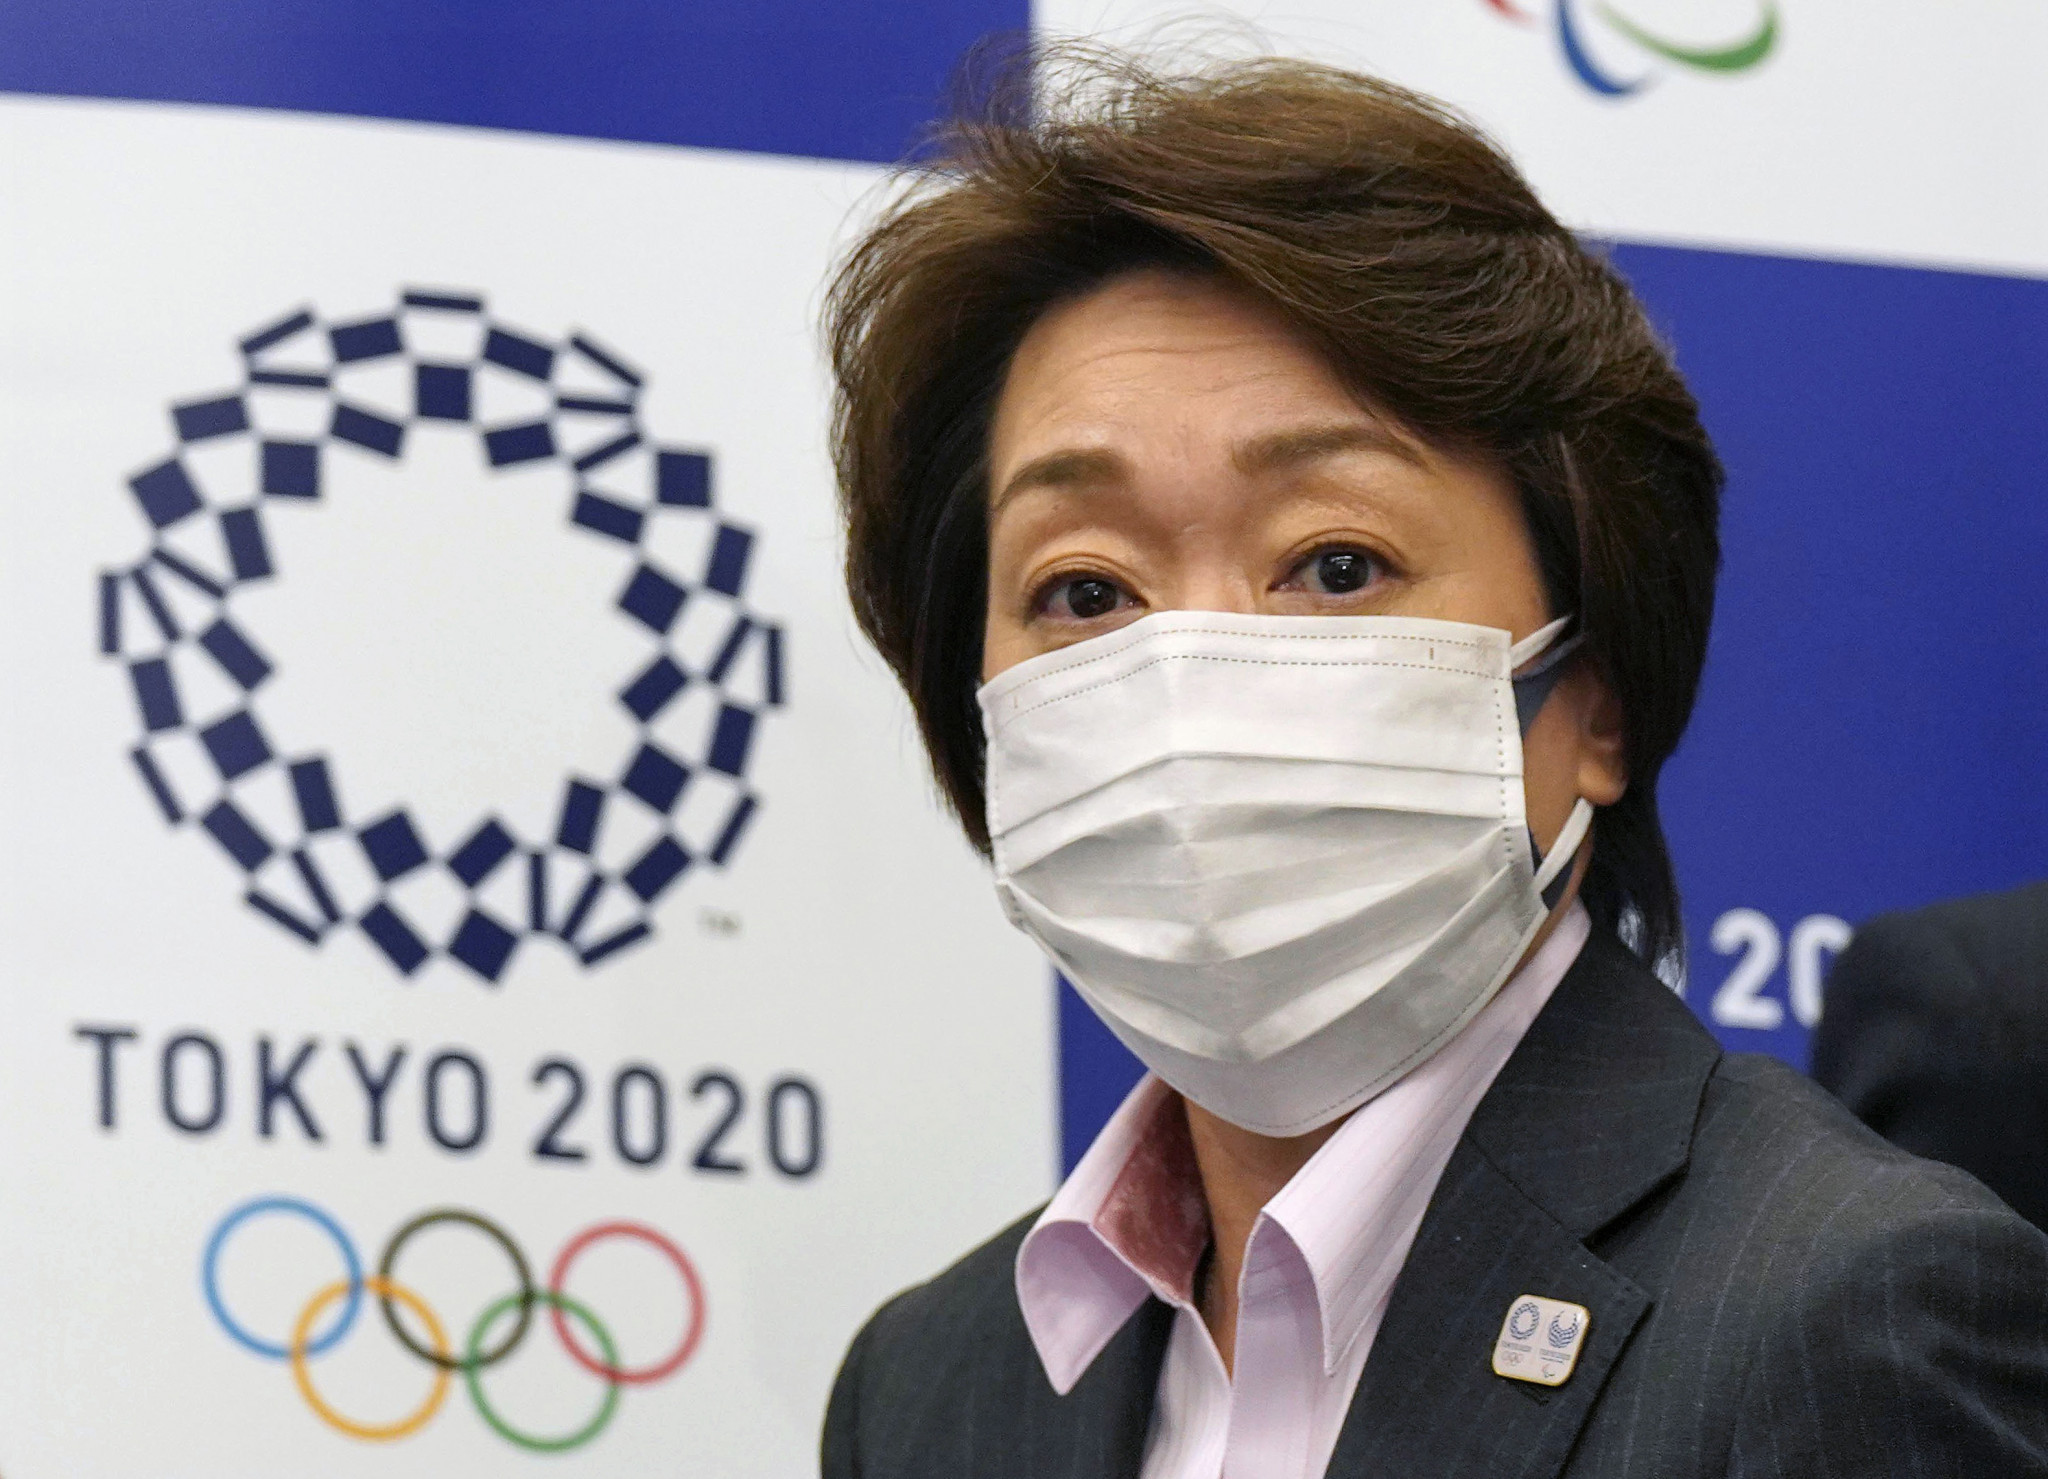 Tokyo 2020 President Seiko Hashimoto is considering increase the COVID-19 testing frequency for athletes ©Getty Images